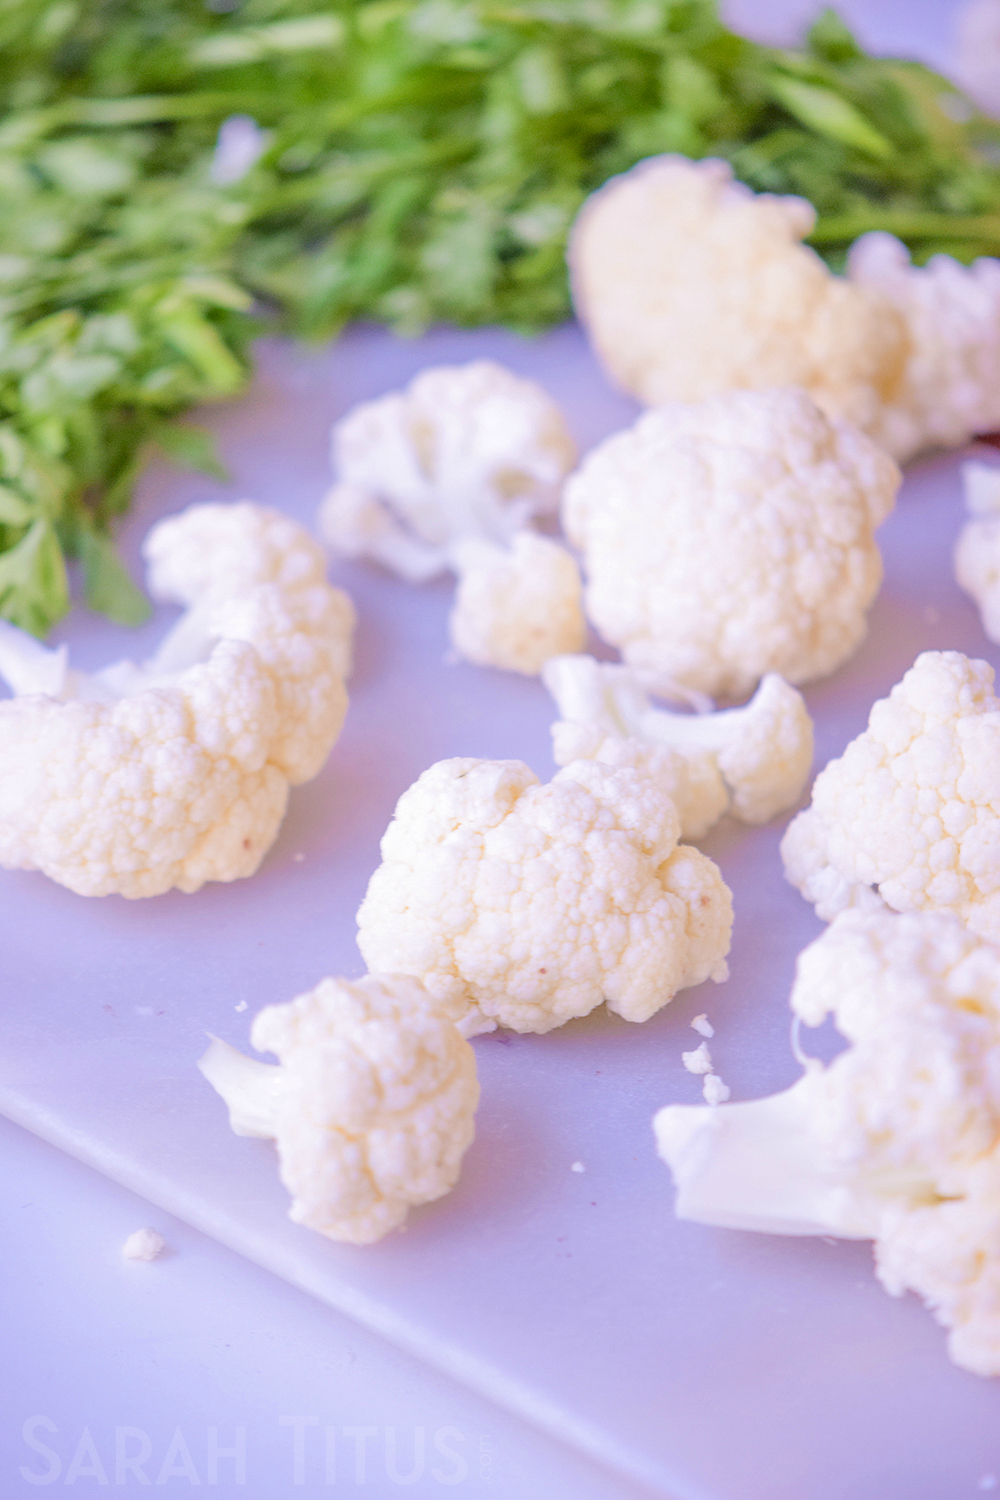 Chopped up pieces of cauliflower on a white cutting board with greenery in the background